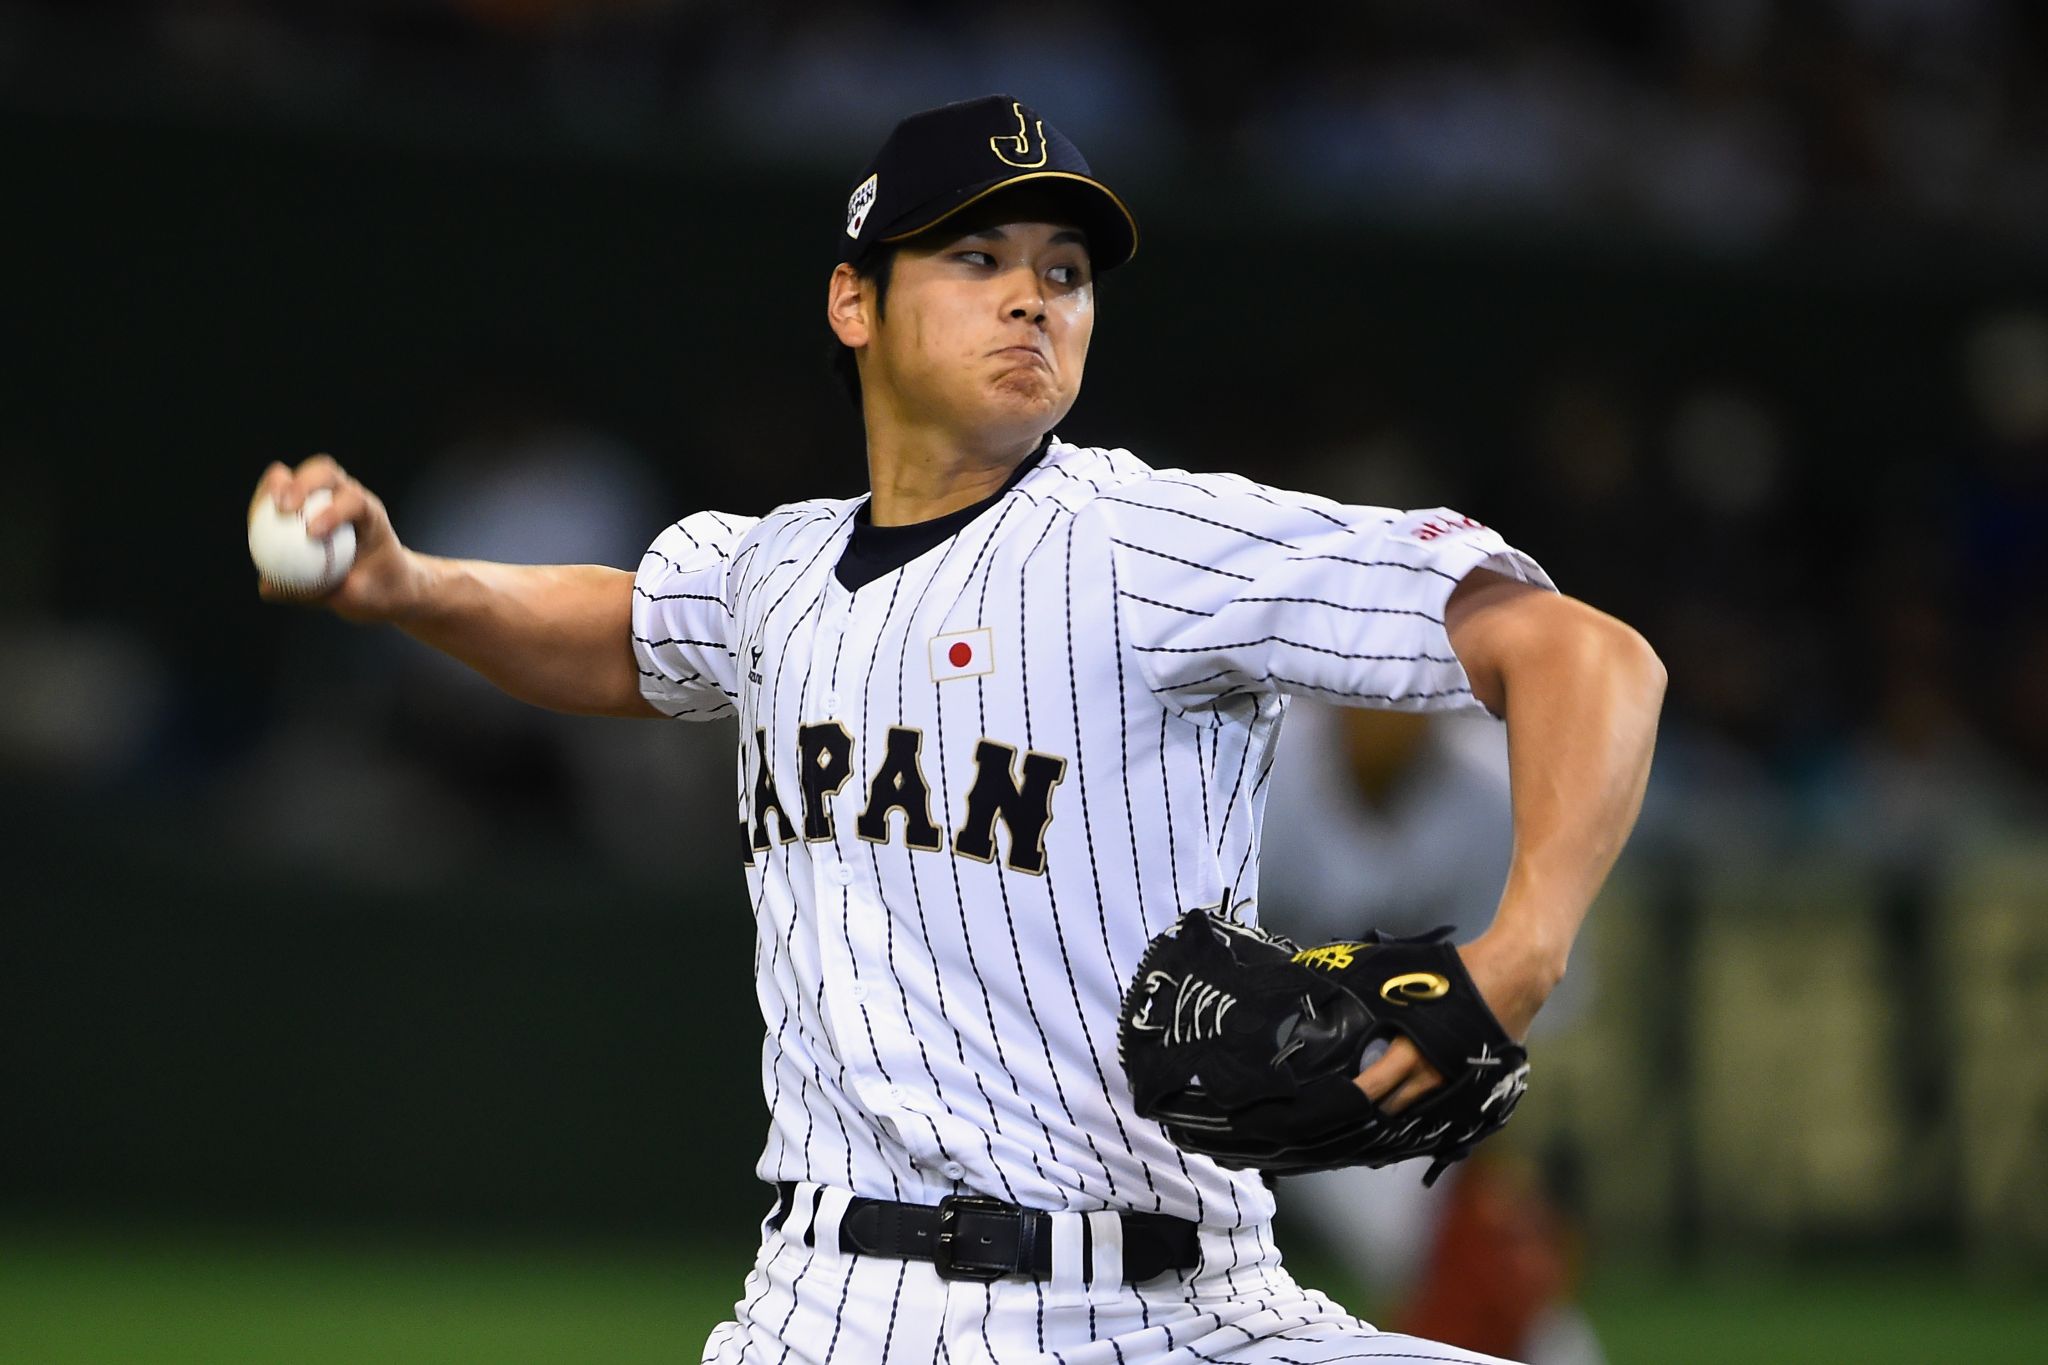 Portrait of Nippon-Ham Fighters Shohei Ohtani on field during batting  News Photo - Getty Images